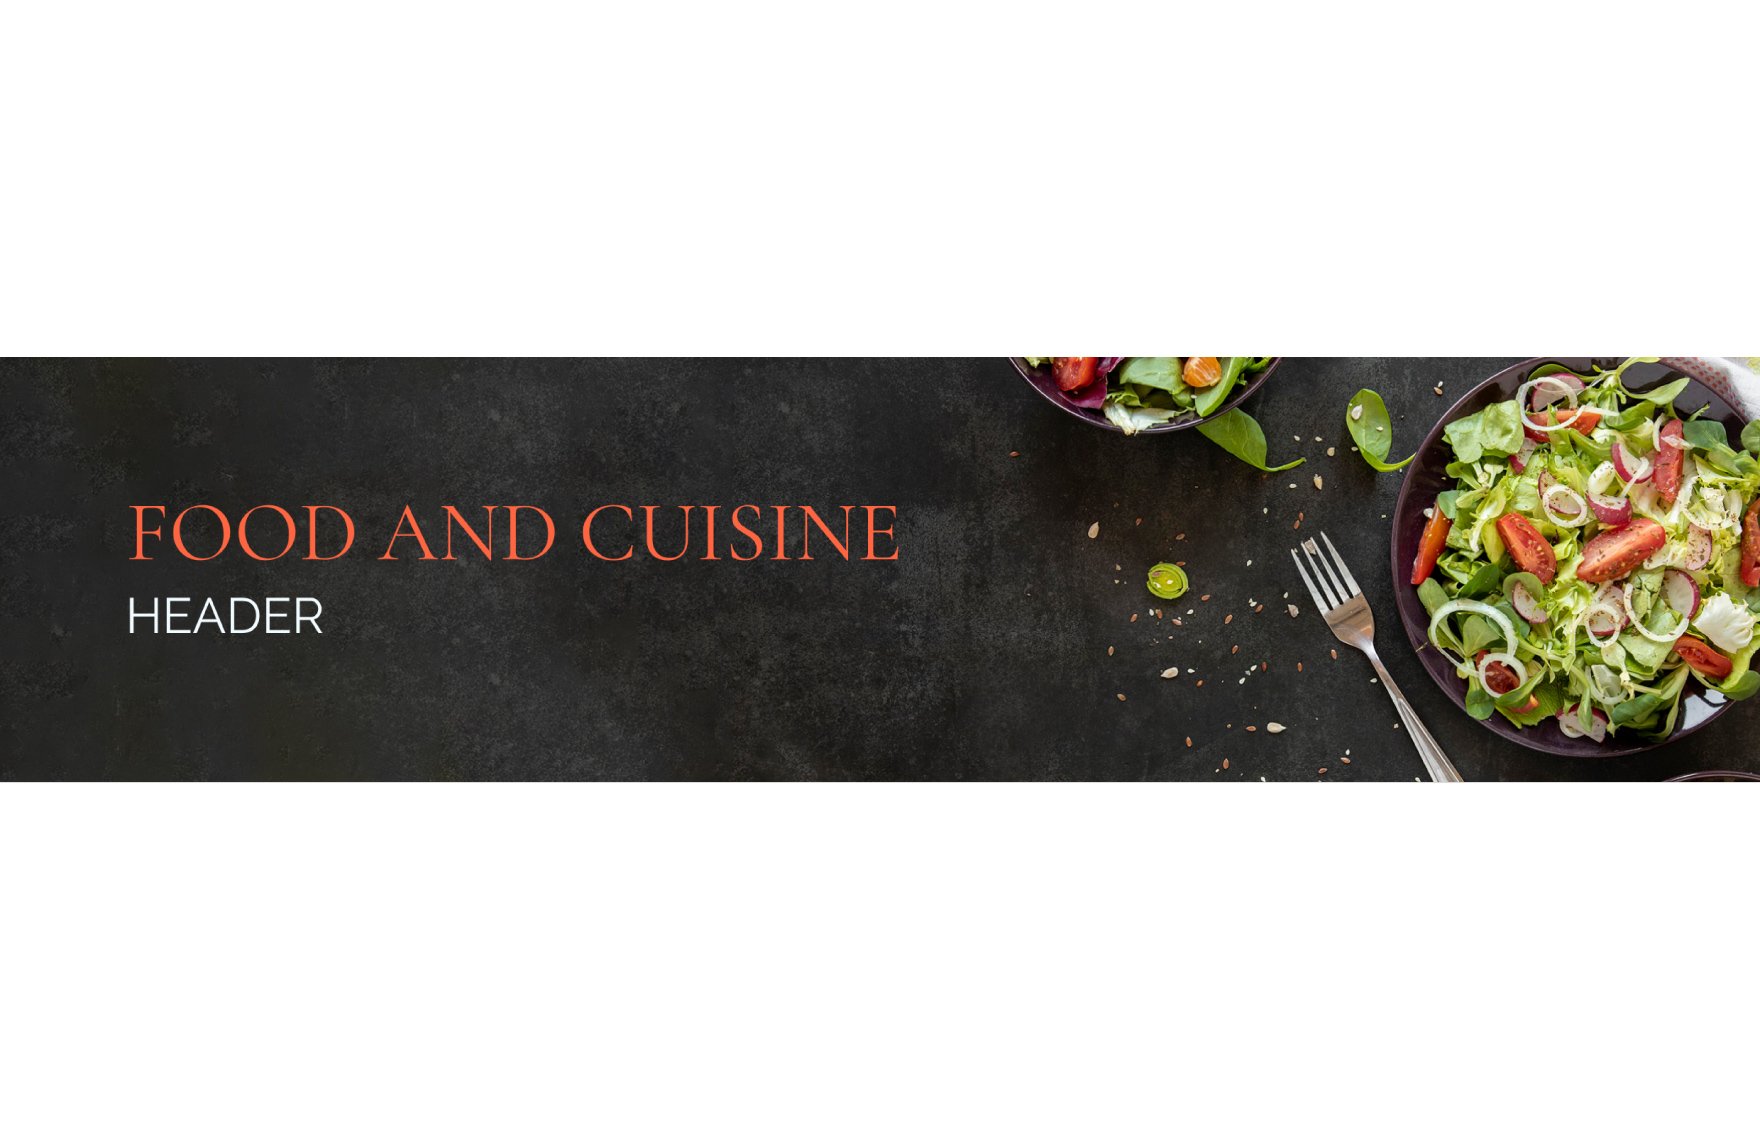 Food and Cuisine Photo Header Template